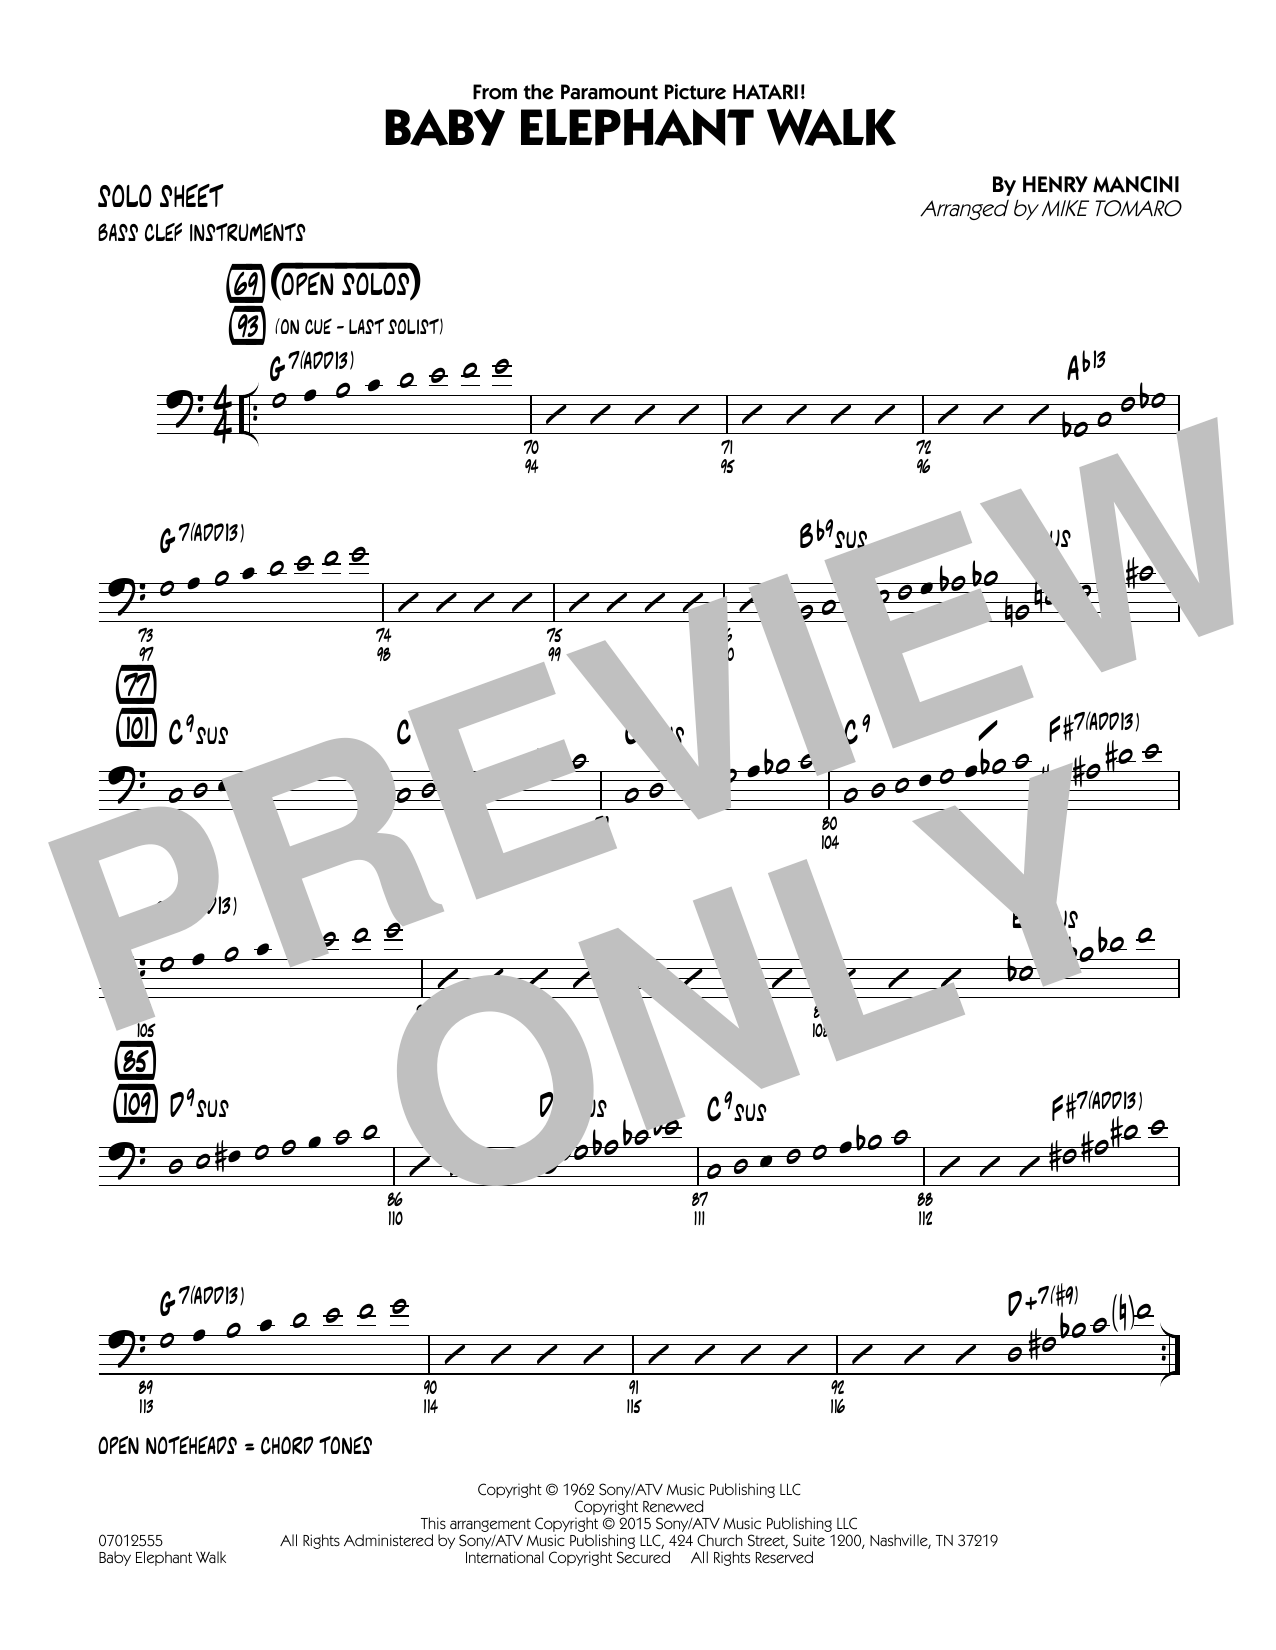 Mike Tomaro Baby Elephant Walk - Bass Clef Solo Sheet sheet music notes and chords. Download Printable PDF.